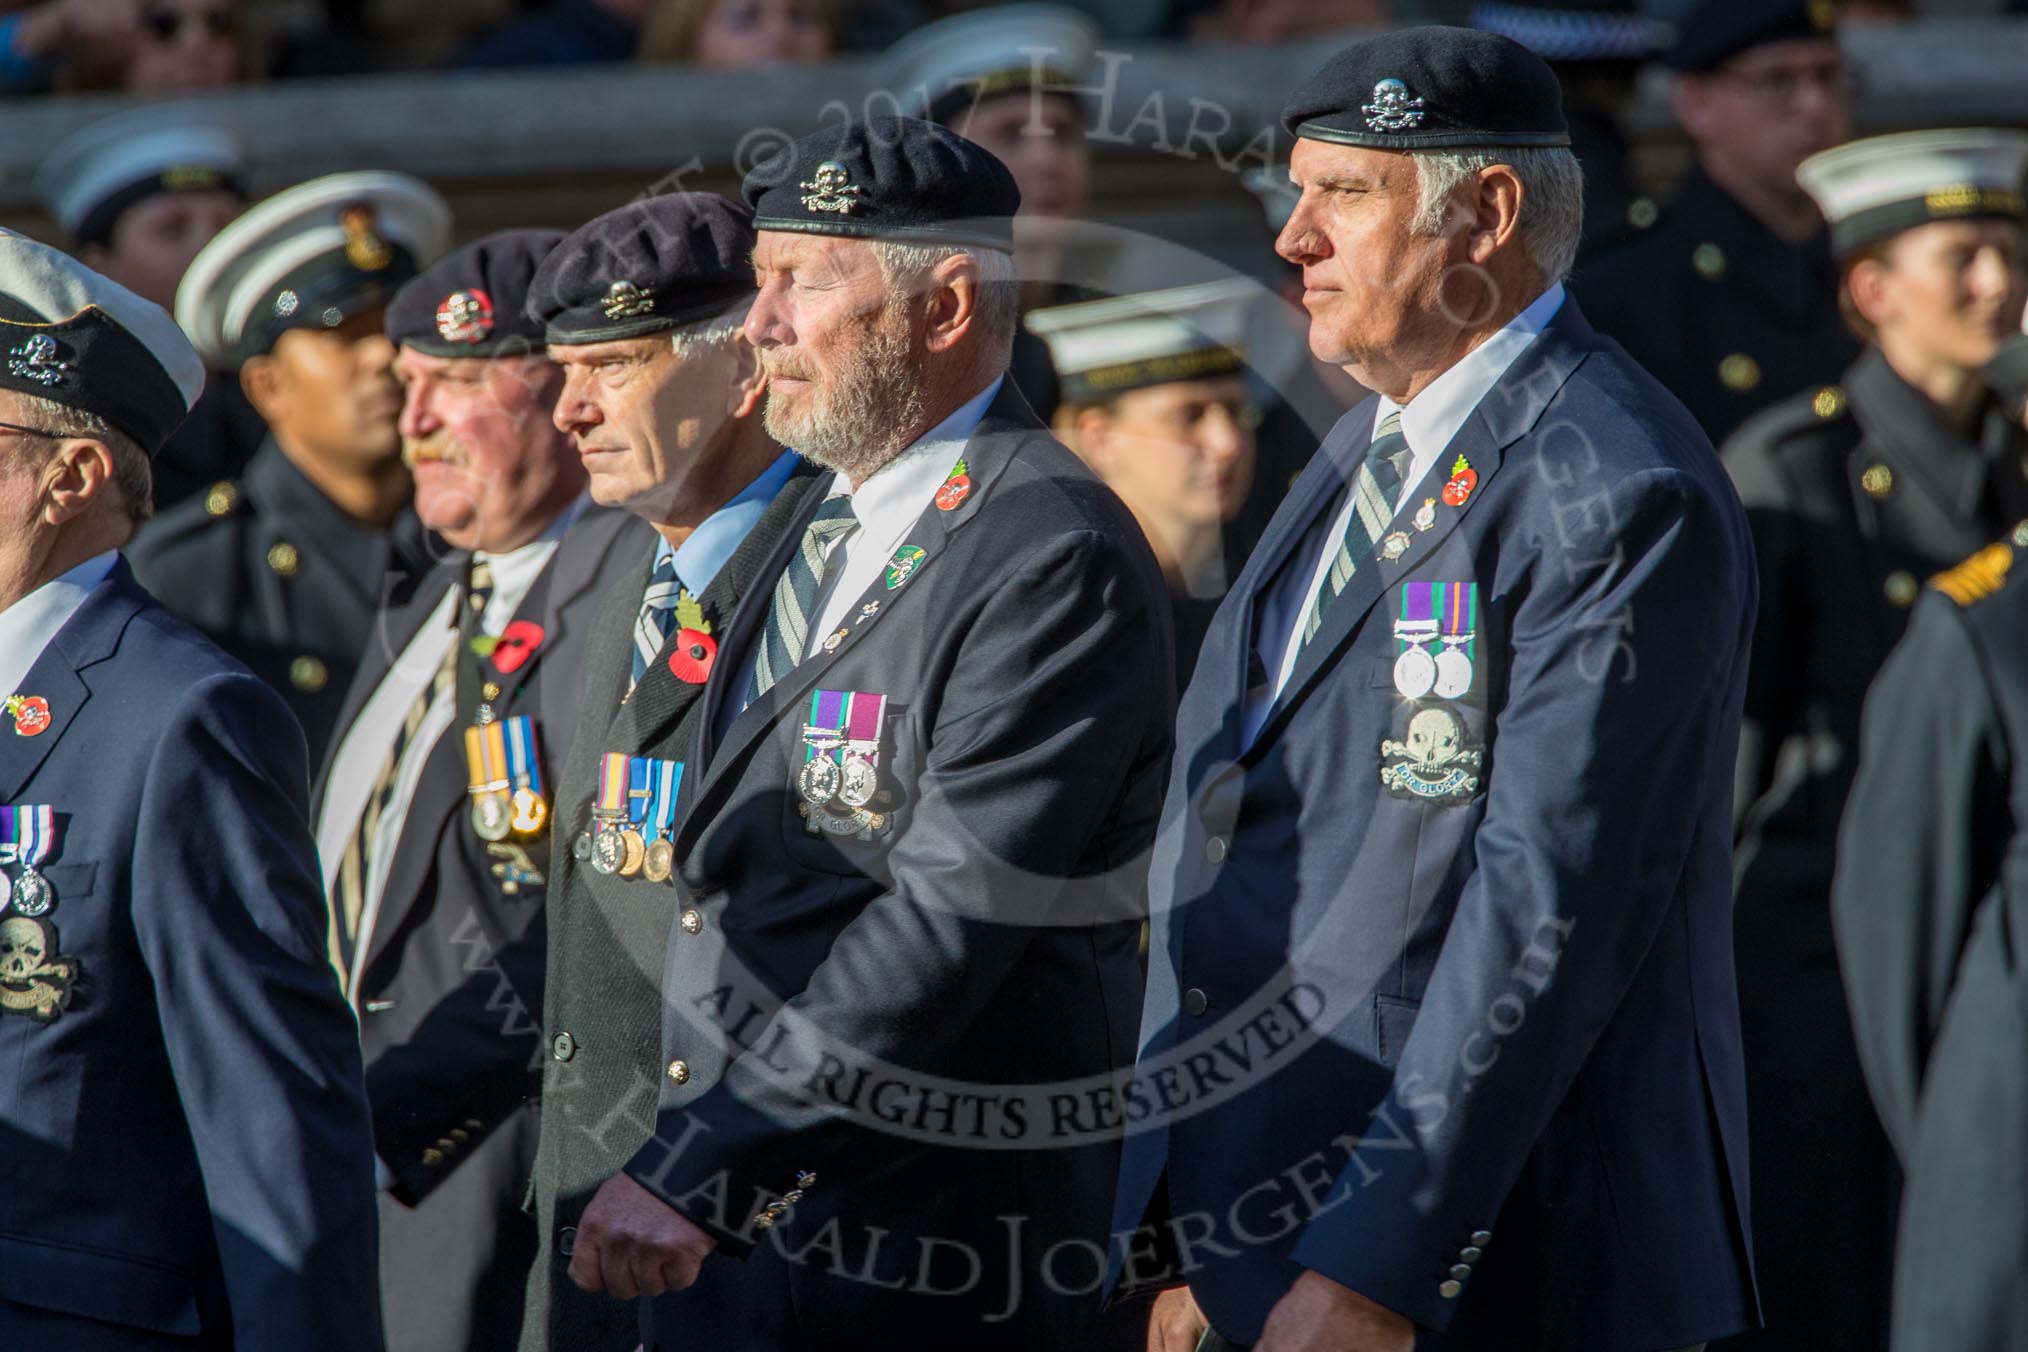 17th/21st Lancers (Death or Glory Boys) Veterans Association (Group B24, 35 members) during the Royal British Legion March Past on Remembrance Sunday at the Cenotaph, Whitehall, Westminster, London, 11 November 2018, 12:11.